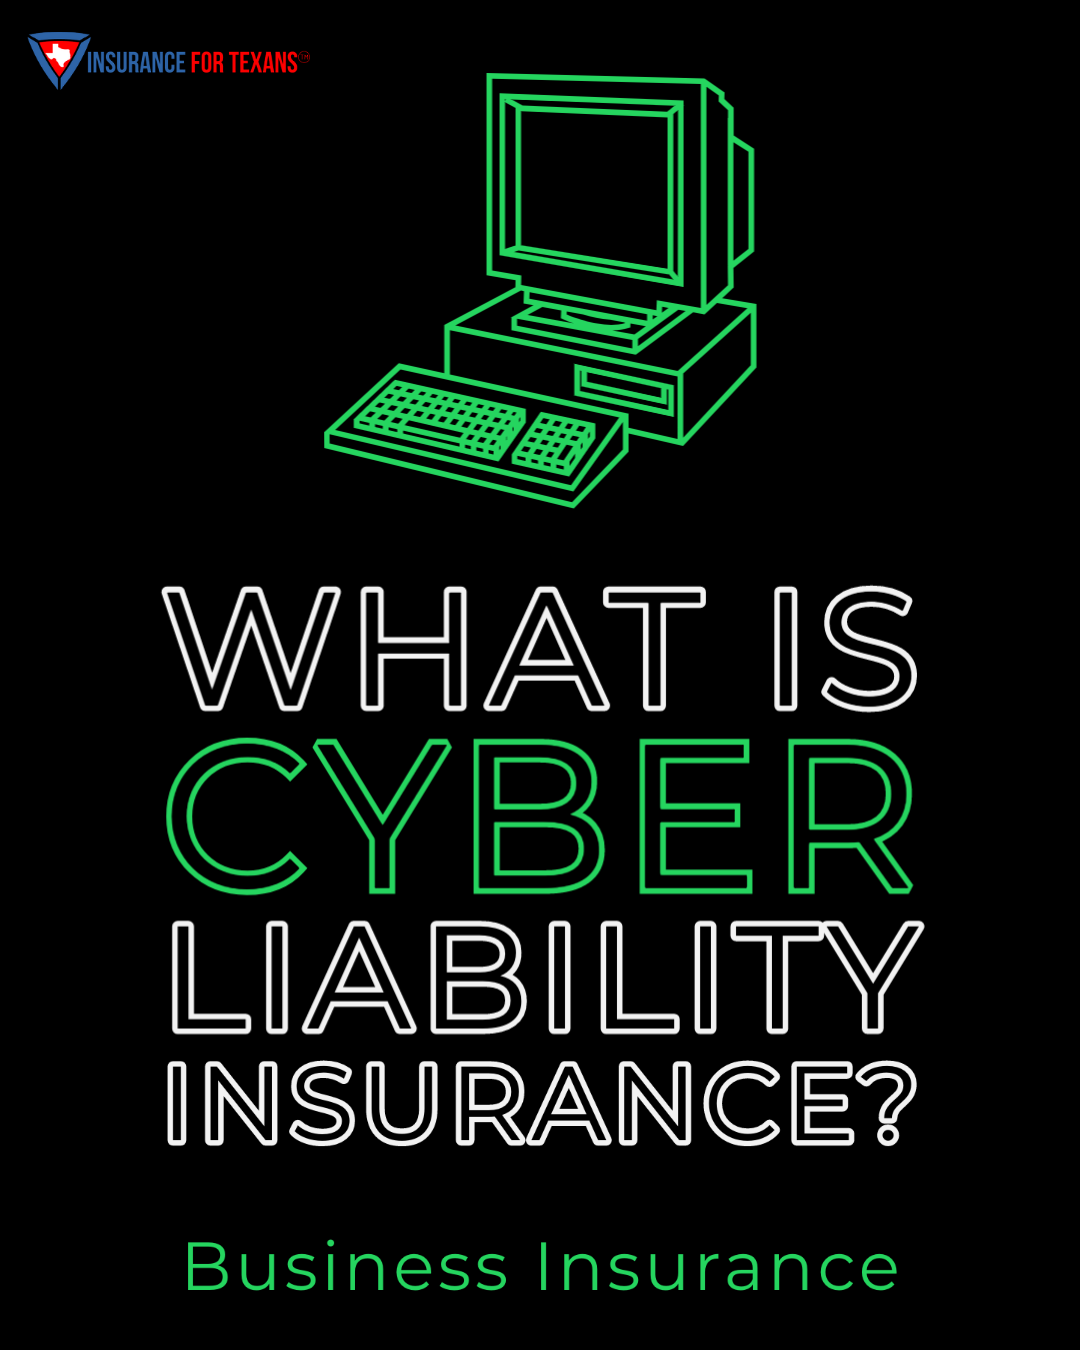 What Is Cyber Liability Insurance?